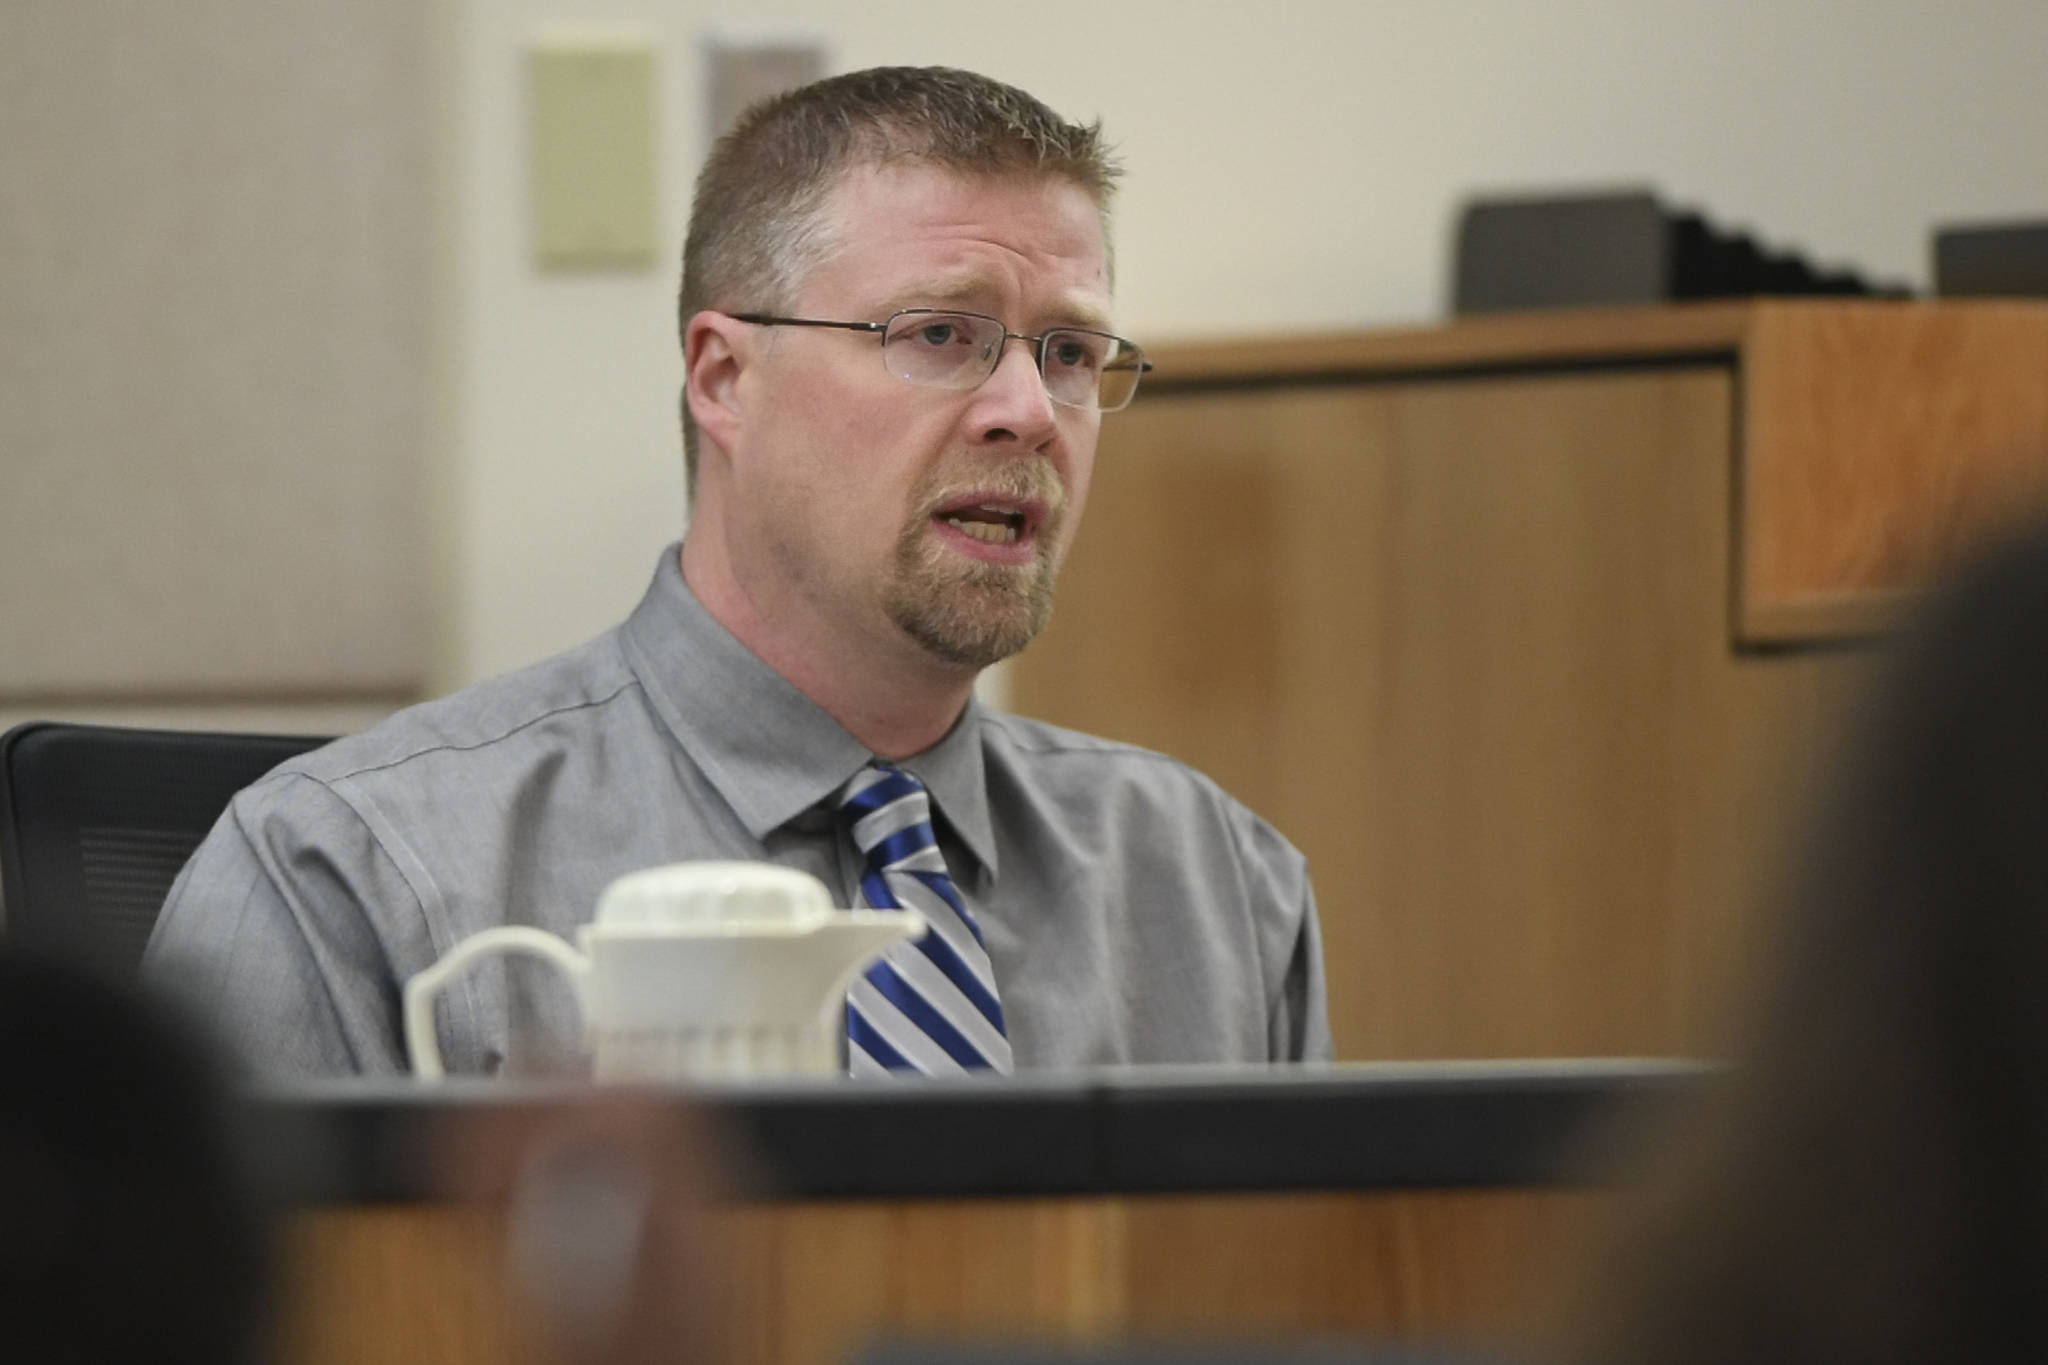 Nate Imes, an investigator with the Alaska Department of Revenue, speaks from the witness stand during the trial of Loretto Lee Jones in Juneau Superior Court on Thursday, Oct. 31, 2019. Jones is on trial for Alaska Permanent Fund Dividend felony theft and fraud. The two charges stem from allegations that Jones filed for her PFD payout in 2016 while having resided outside the state for more than 180 days. (Michael Penn | Juneau Empire)